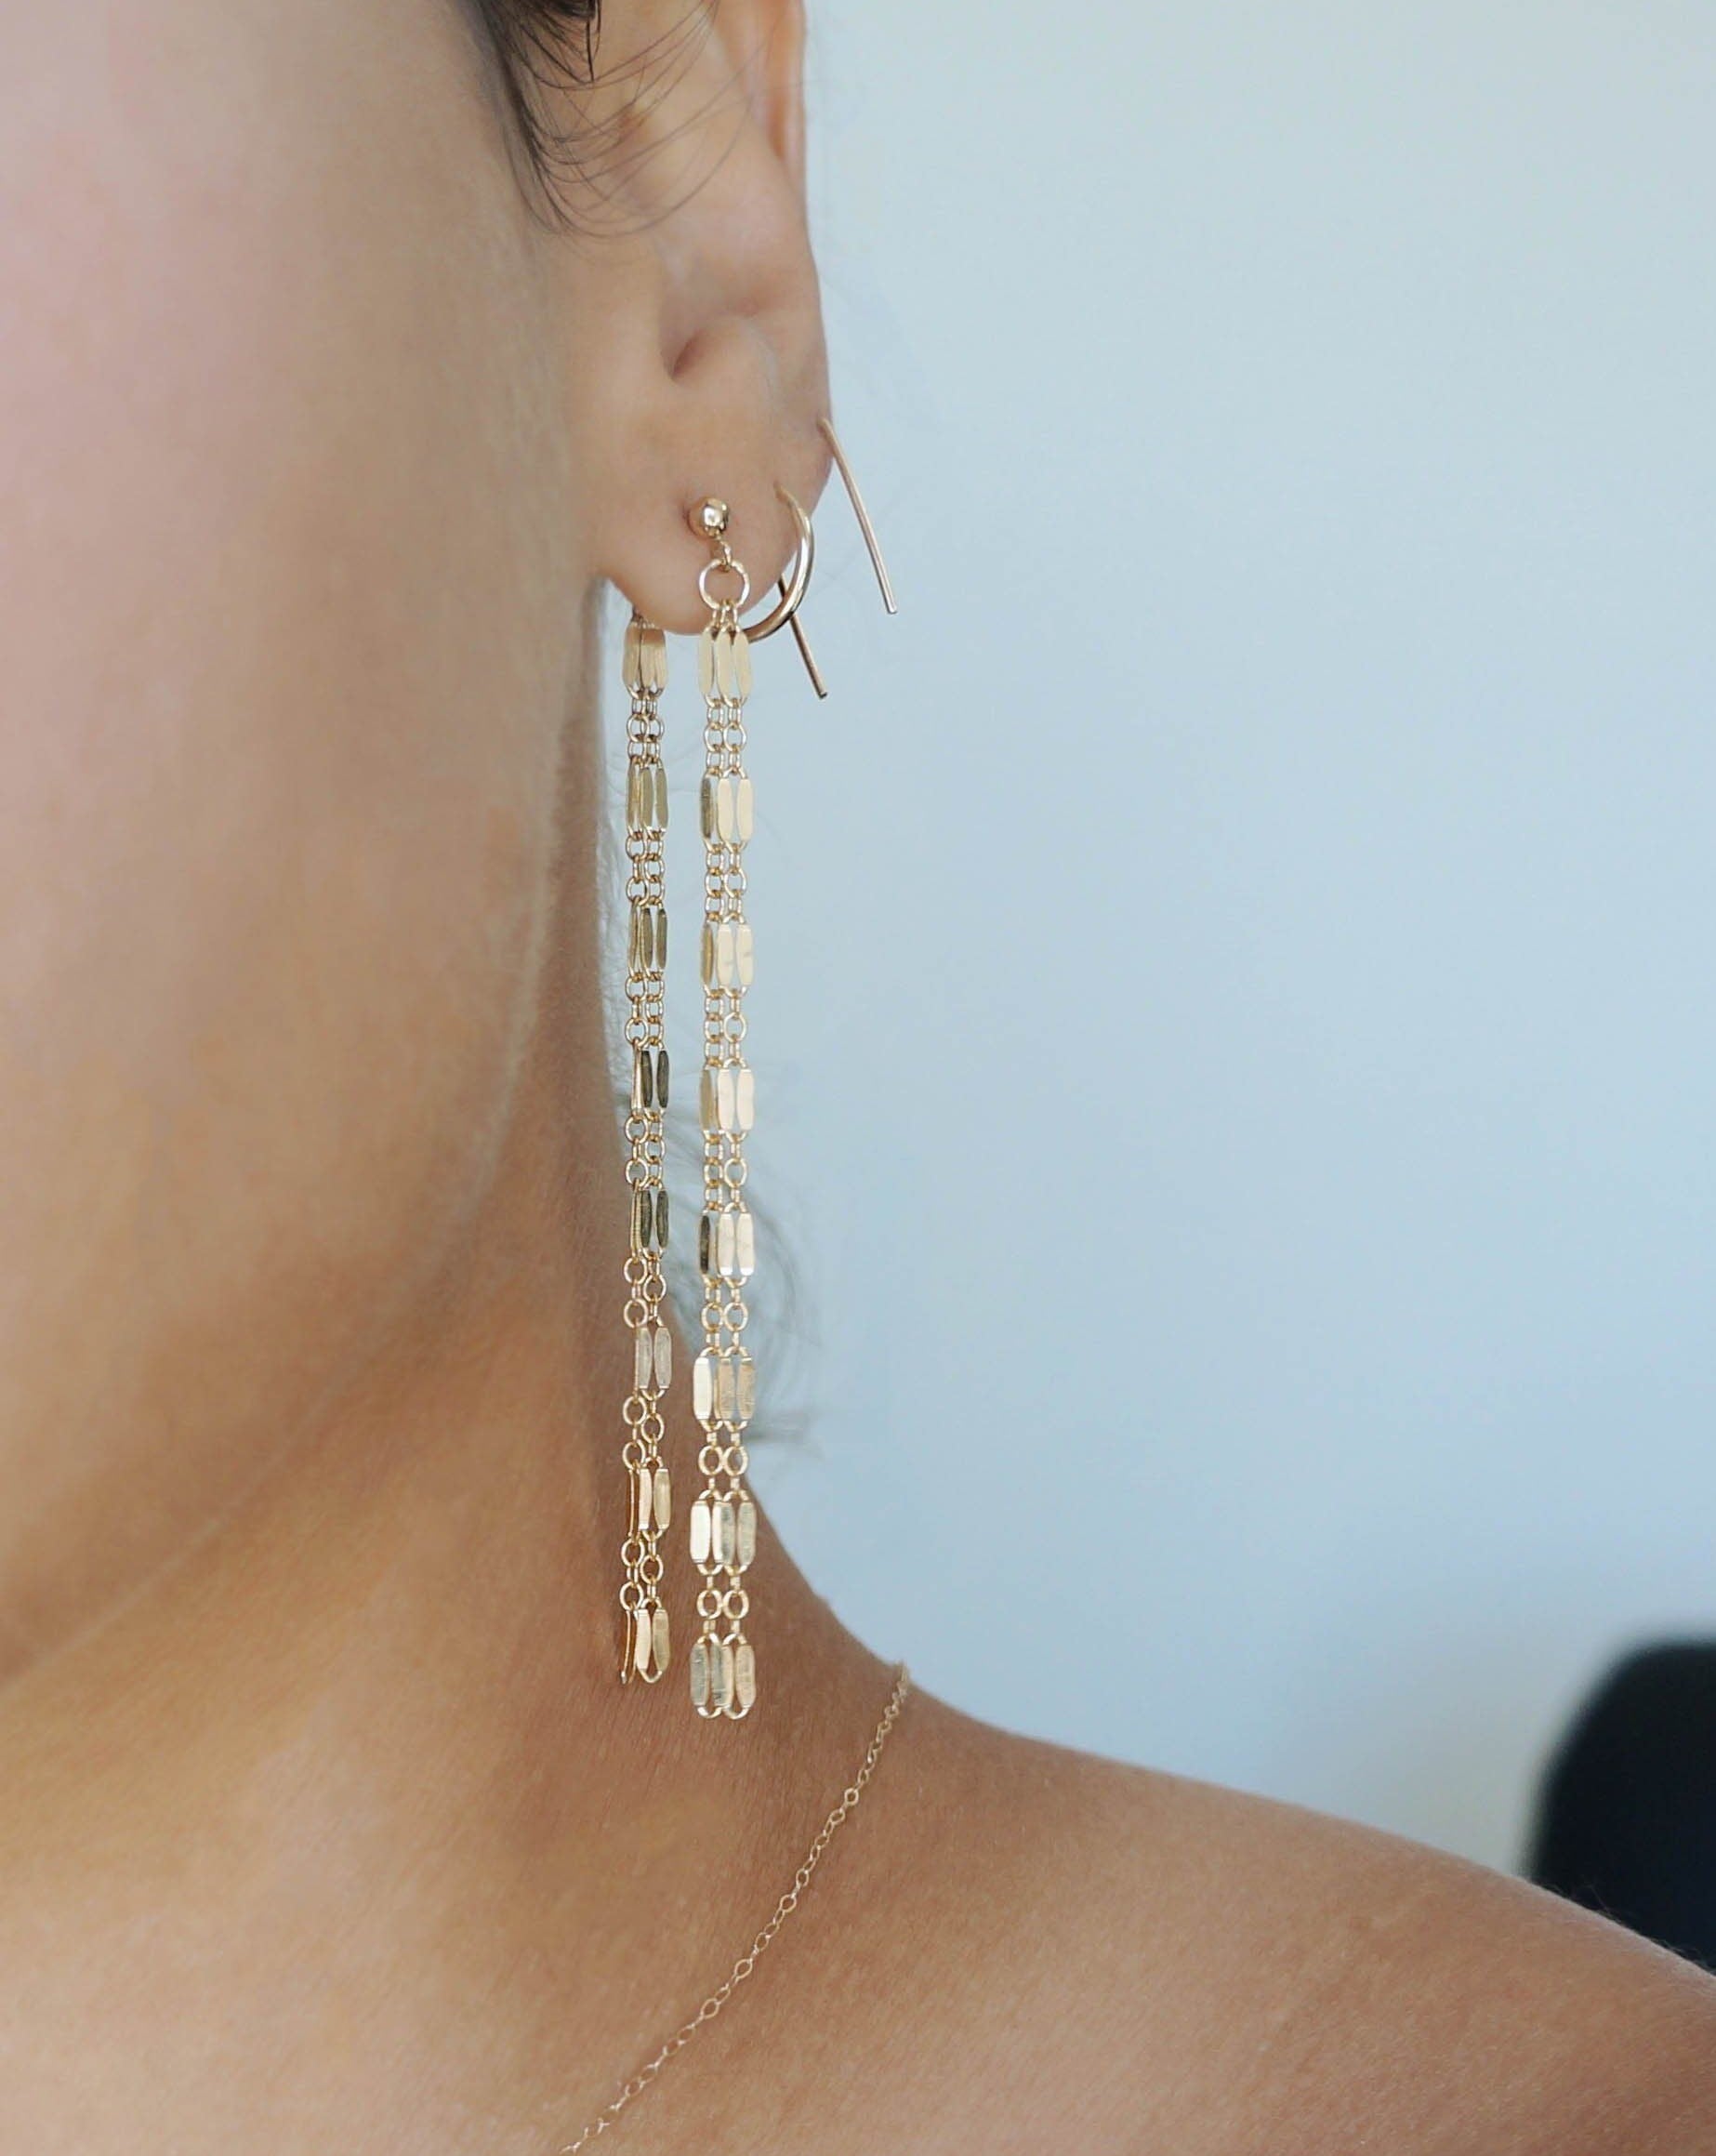 Avenas Earrings by KOZAKH. Double chain style drop earrings in 14K Gold Filled with earring drop length of 3 inches.